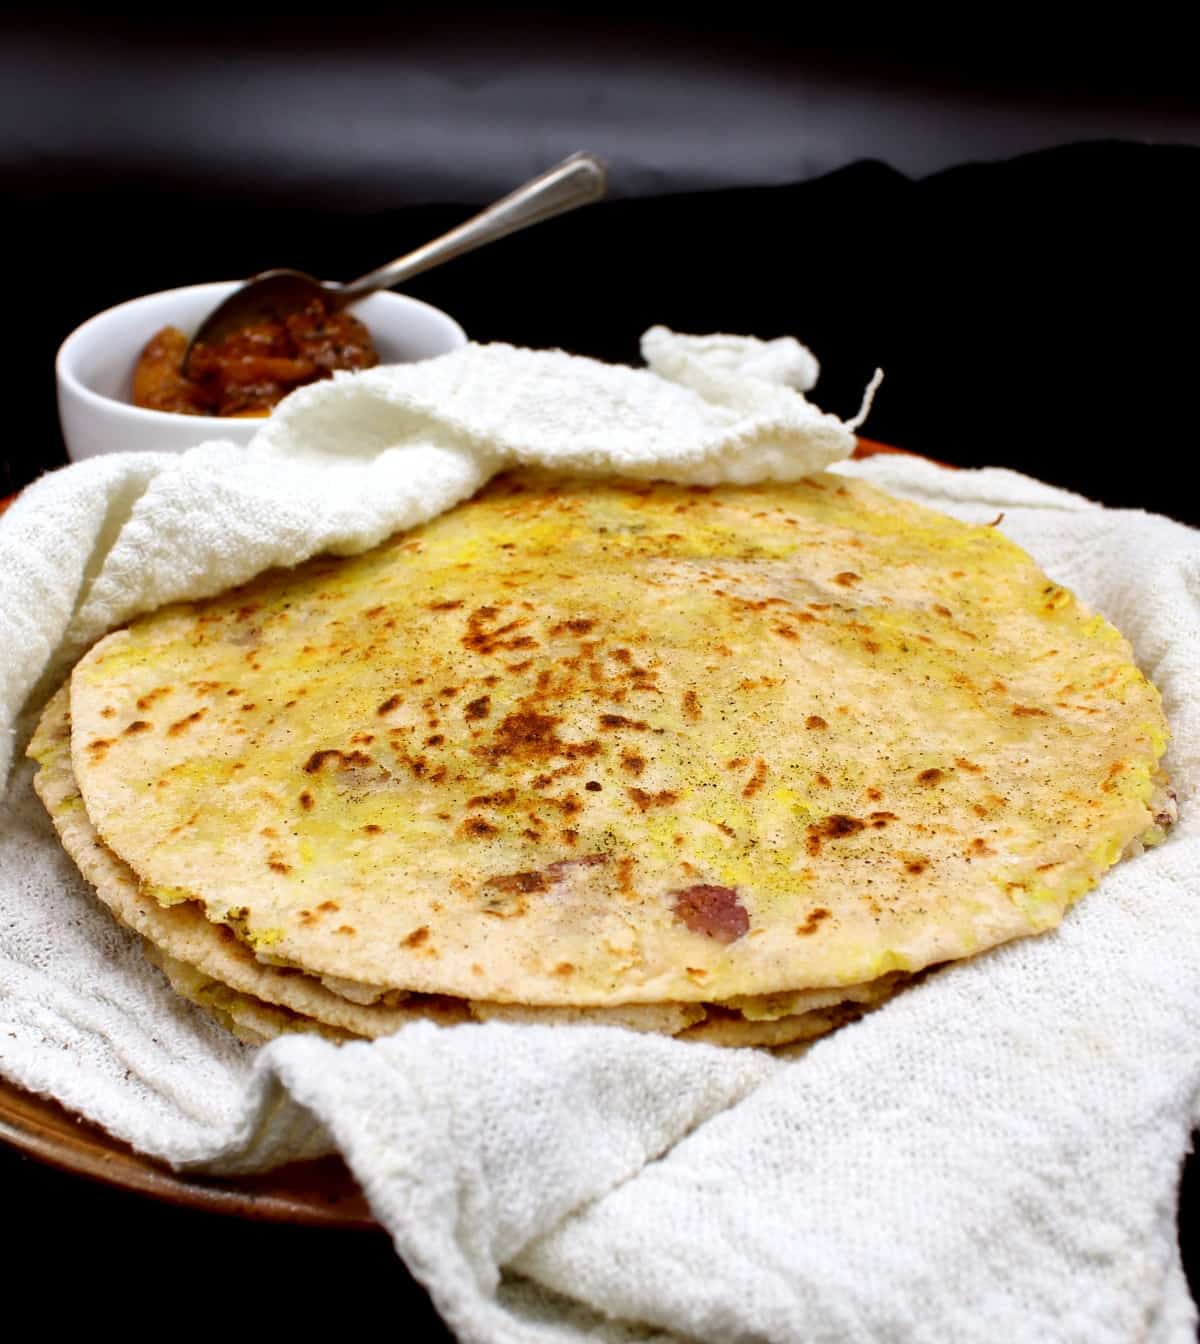 A front shot of a stack of freshly baked aloo parathas nestled in a white flour sack towel on an earthenware plate with a small white ceramic bowl of Indian lime pickle on the side, all on a black background.